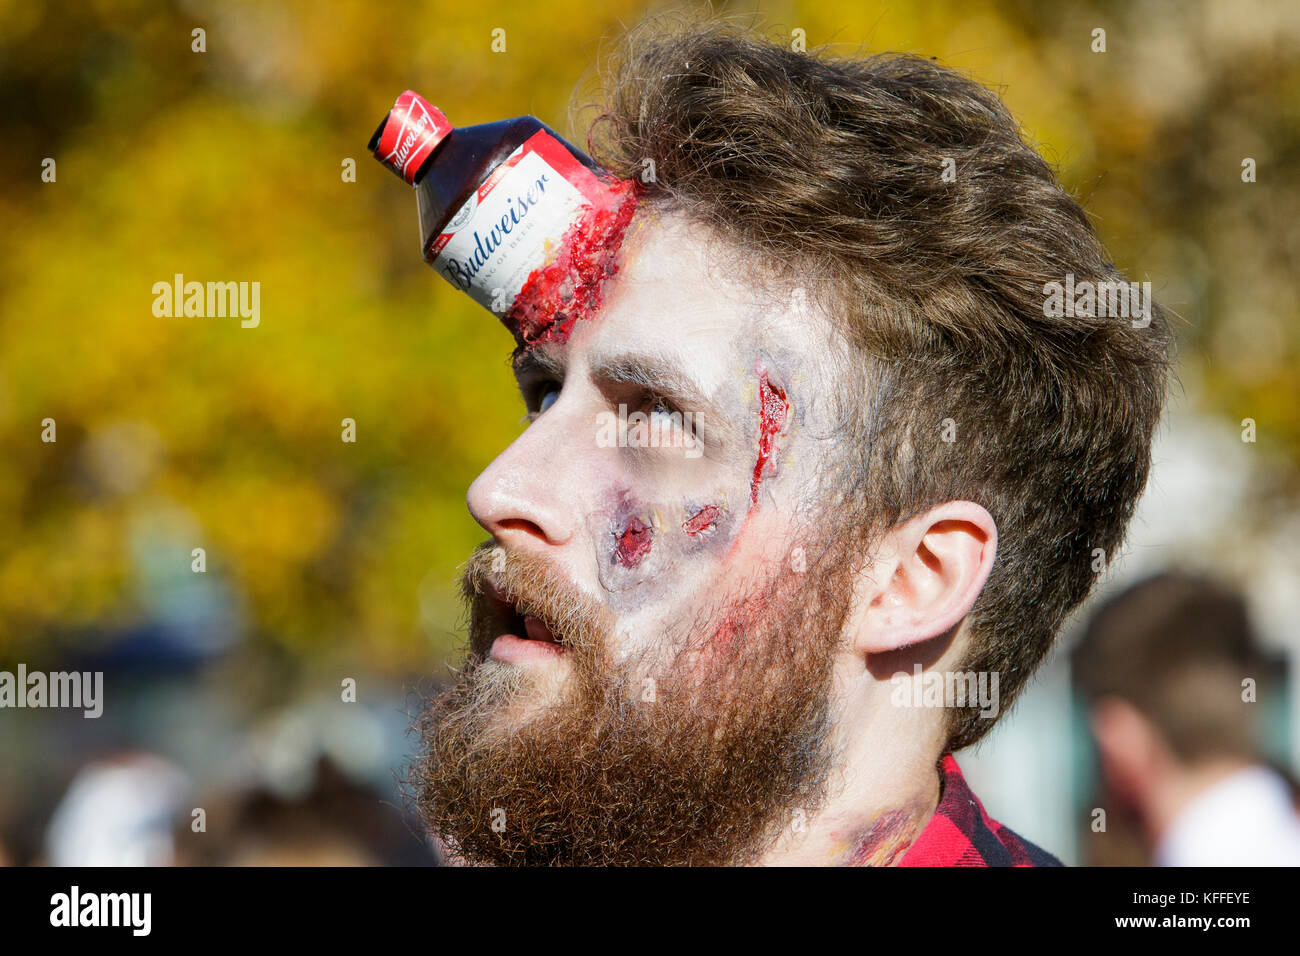 Bristol, UK. 28th Oct, 2017. A man dressed as a zombie is pictured as he participates in a zombie walk through the city centre. Stock Photo